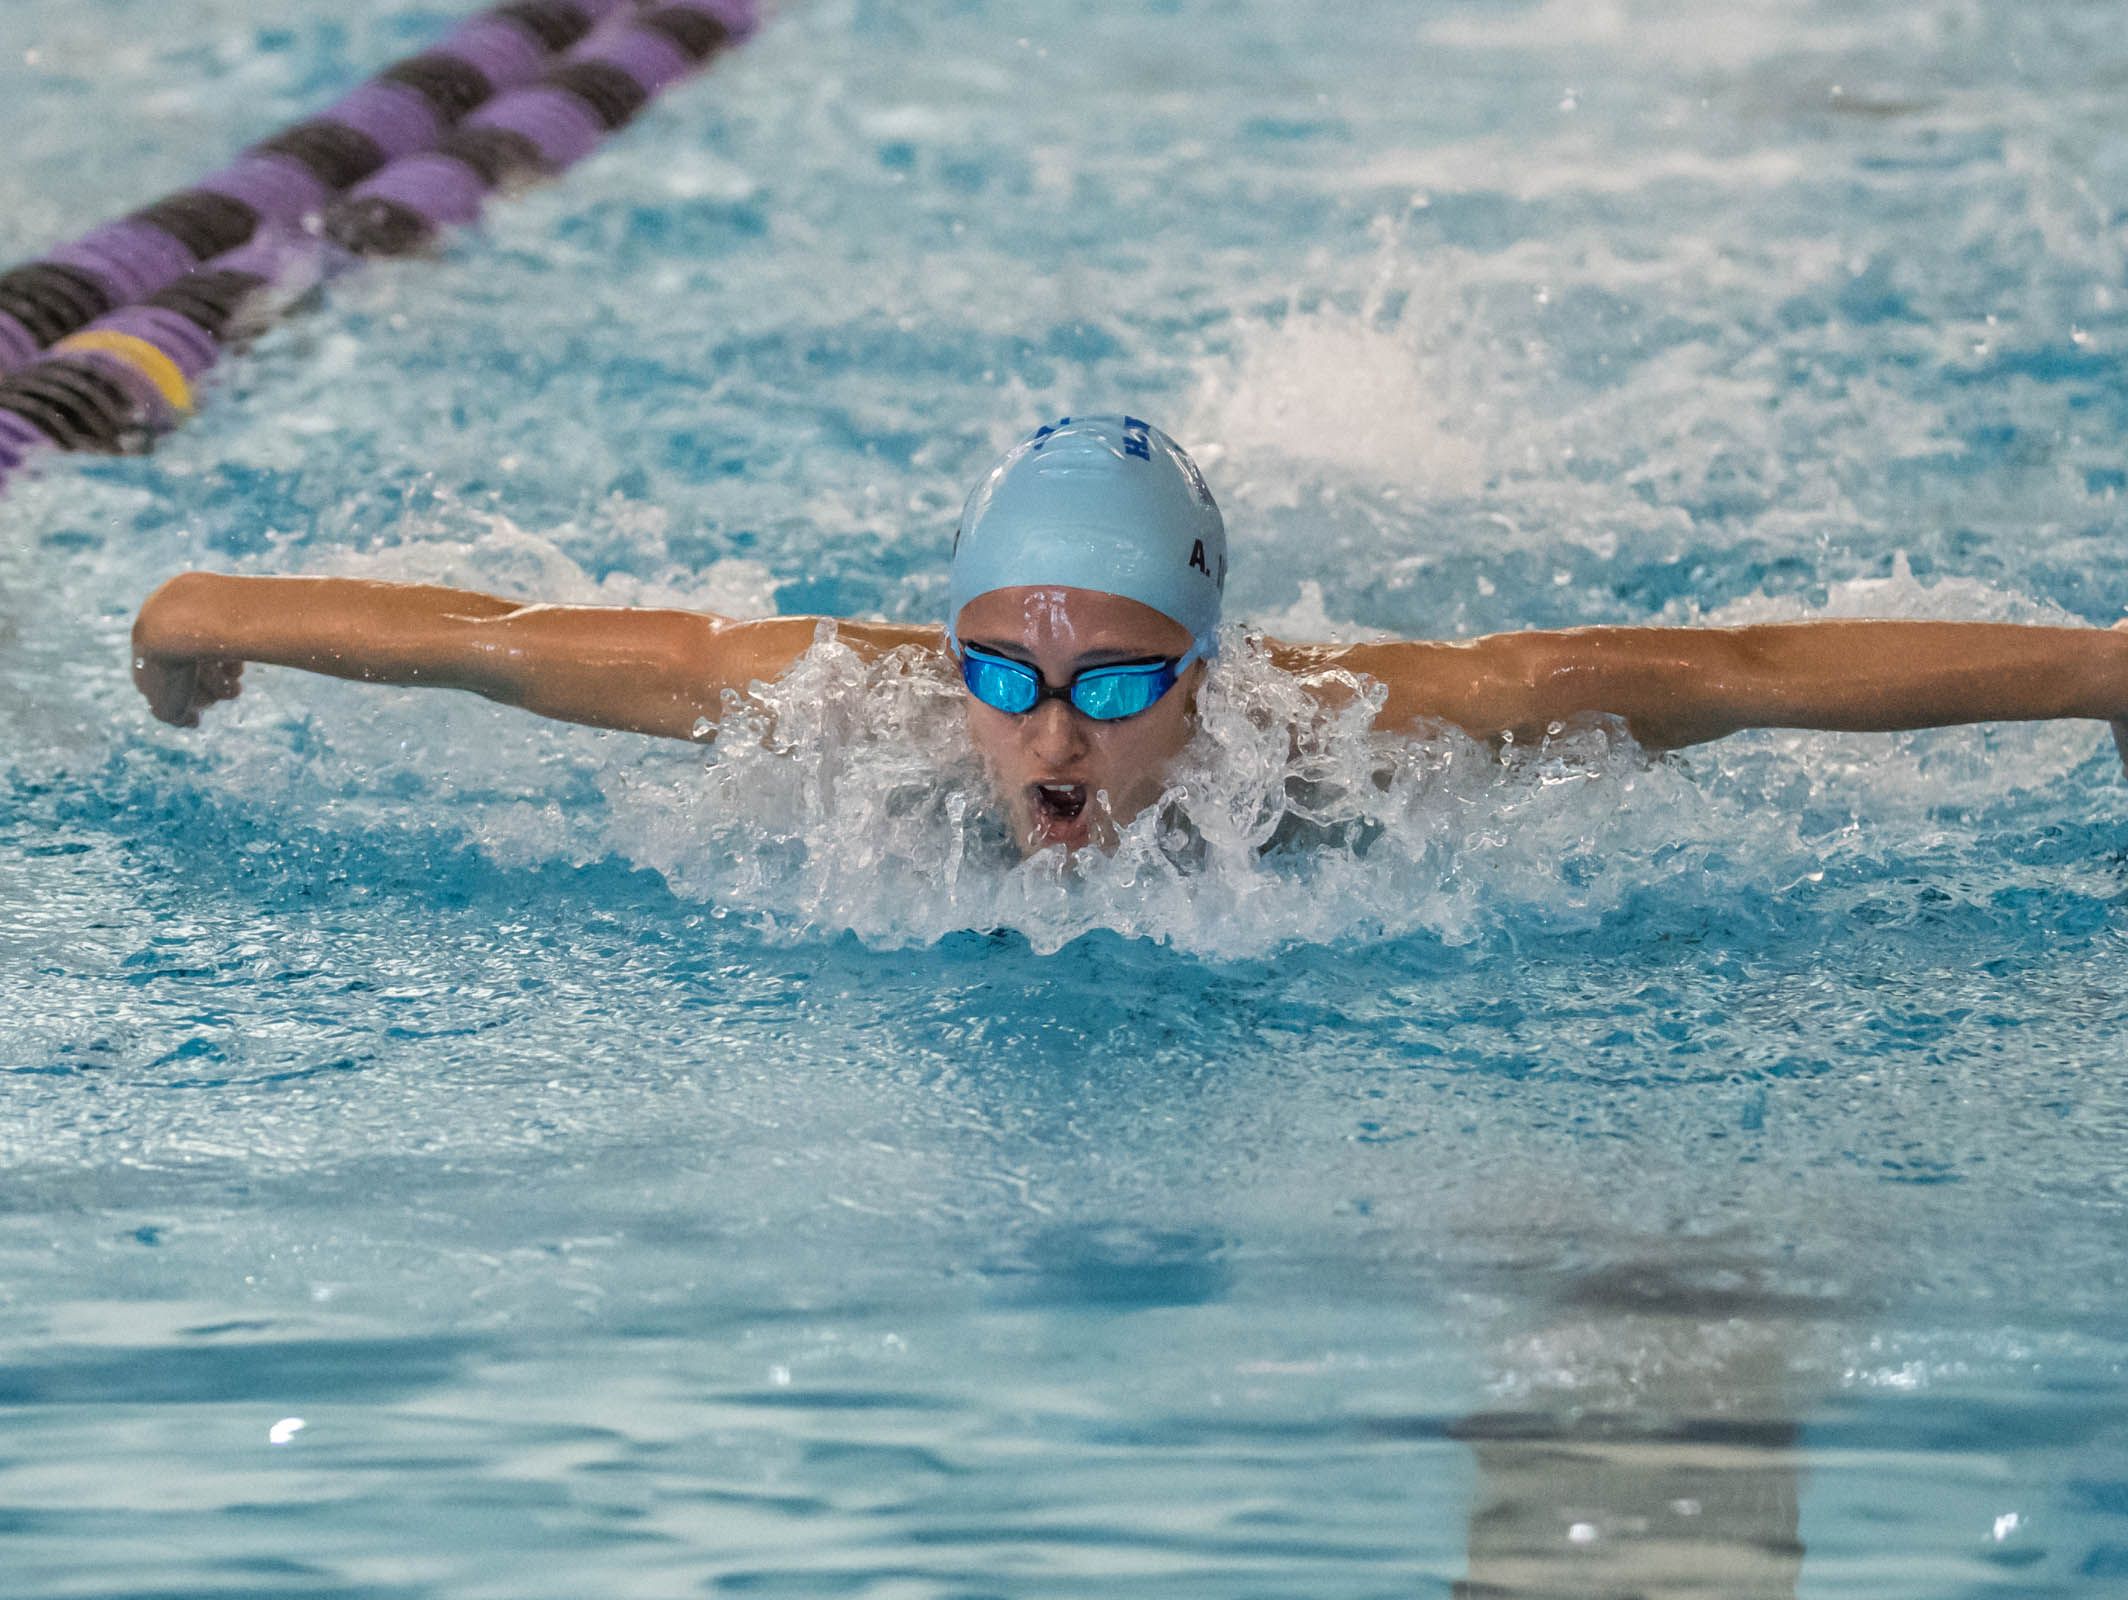 Harper Creek's Alysa Wager competes in the 100 Yard Butterfly during the 2016 All-City Swim Meet held at Lakeview on Saturday.